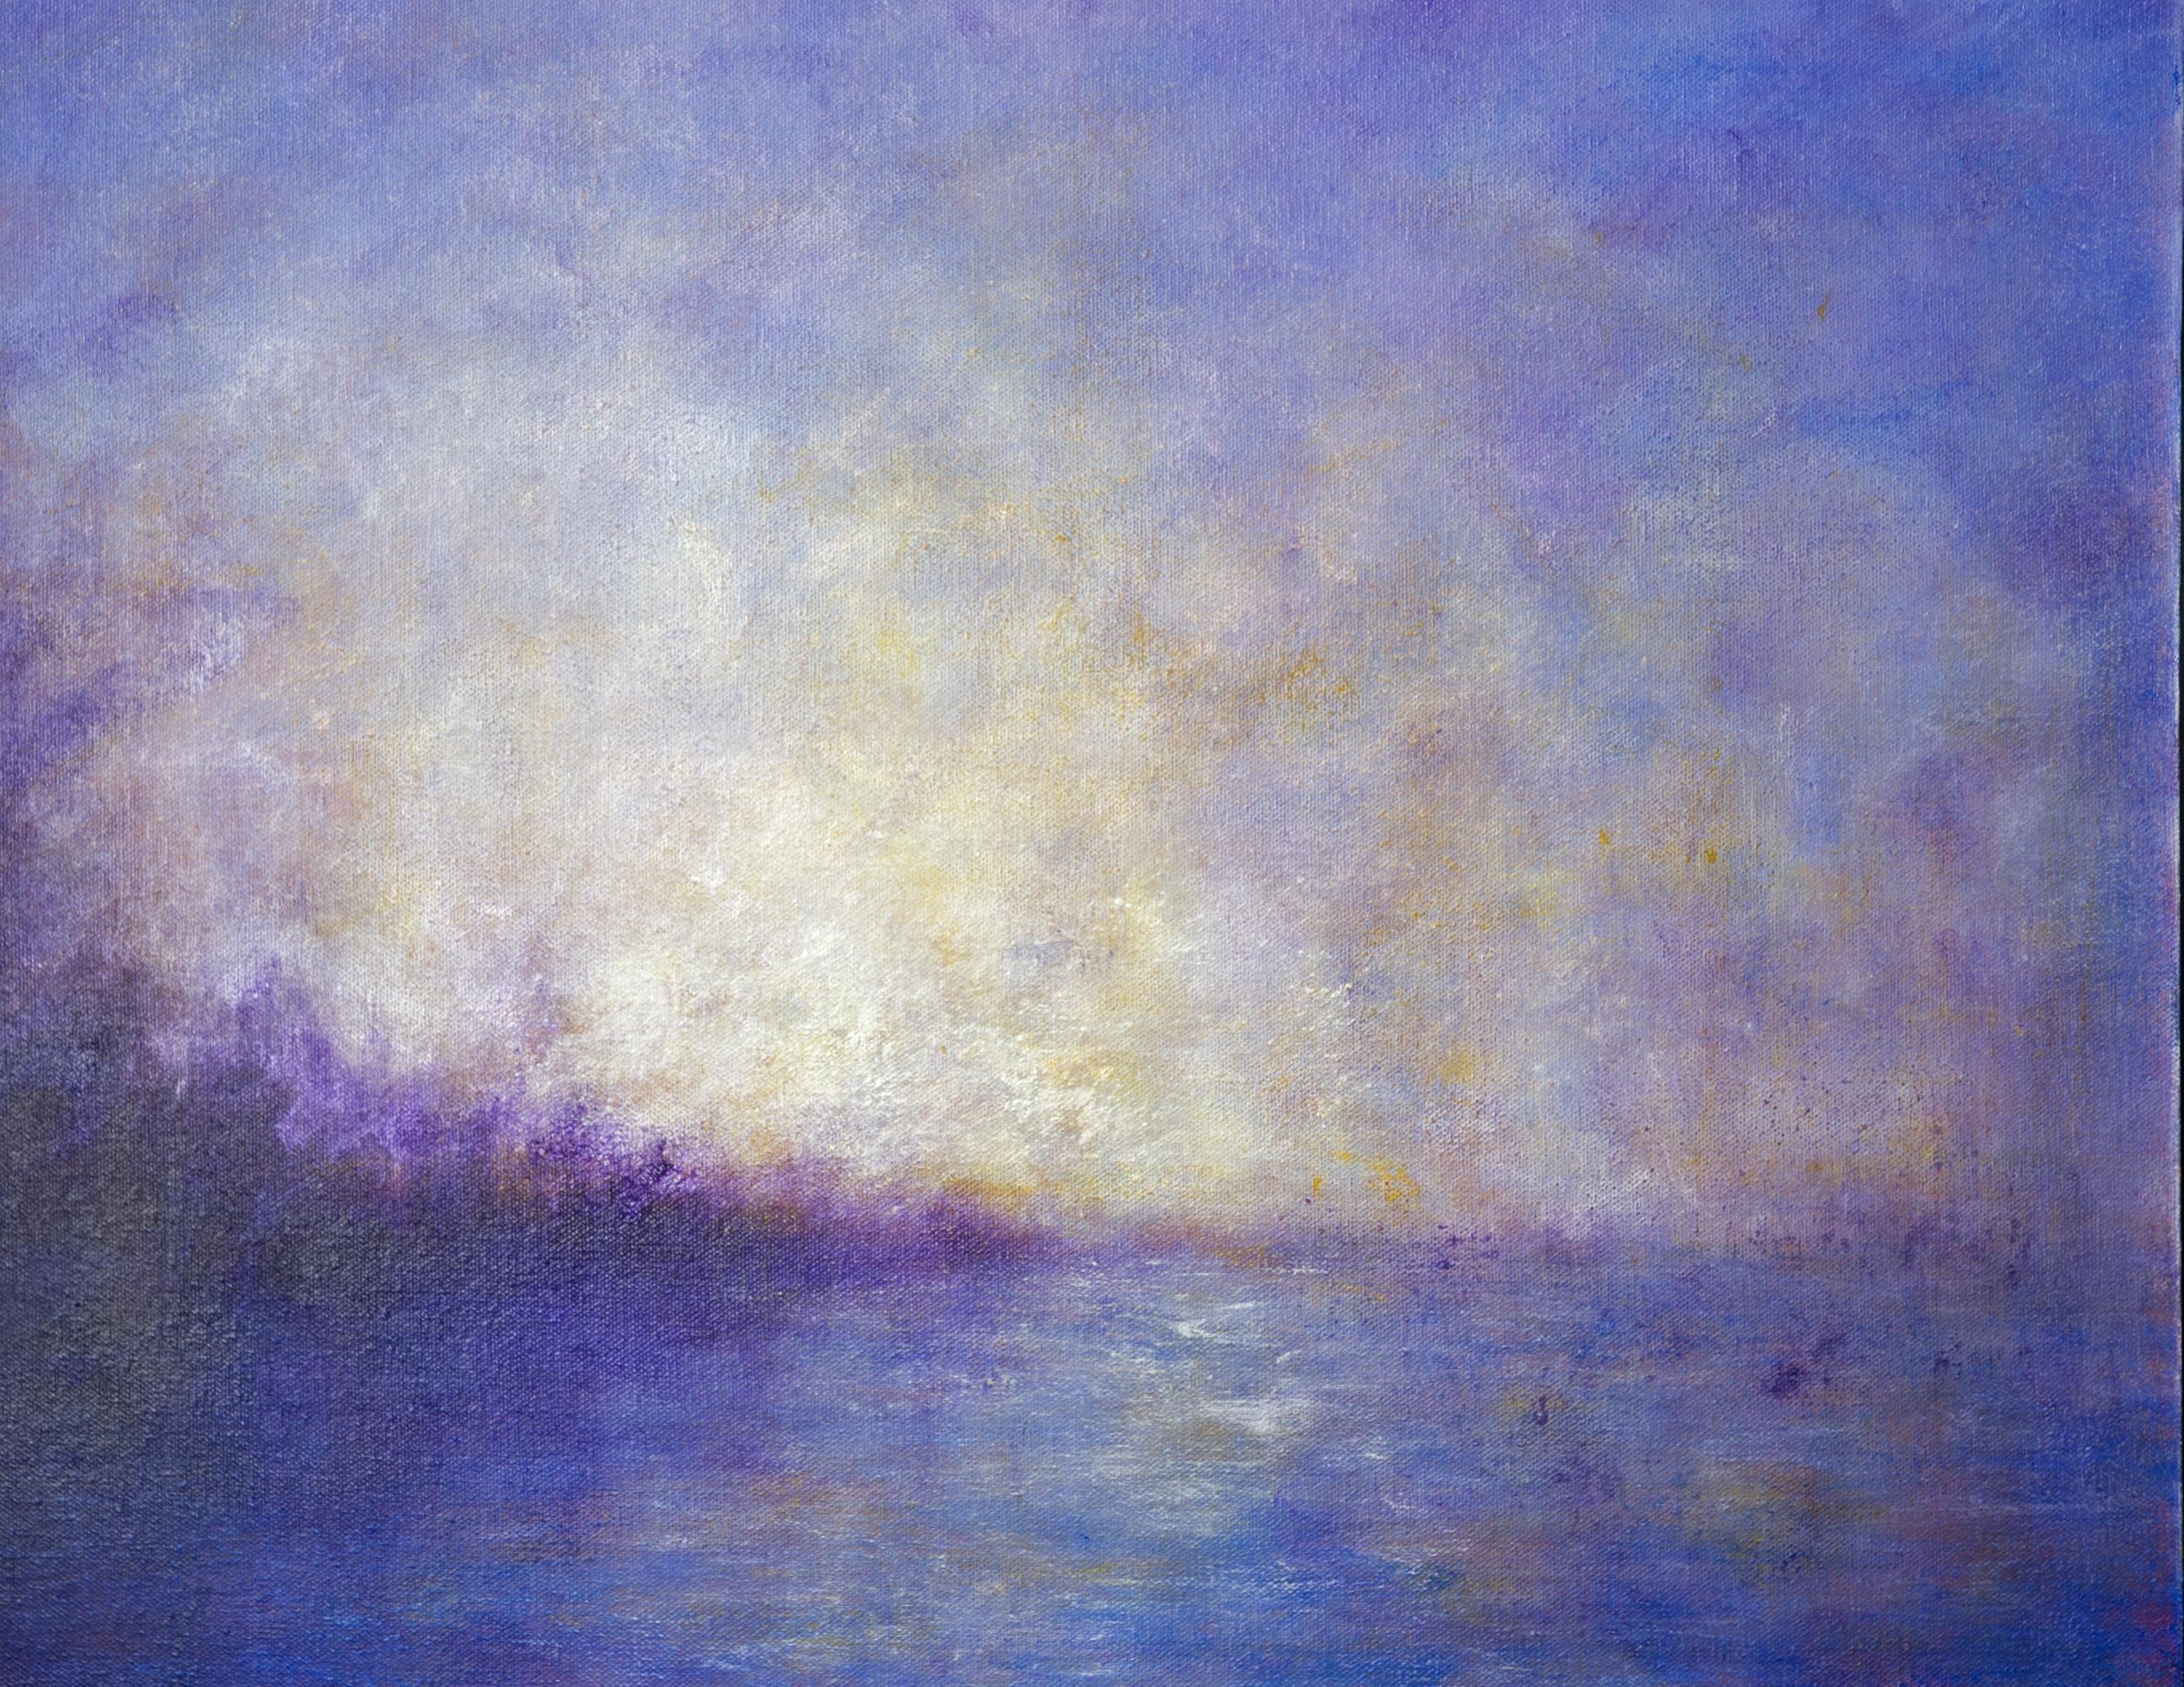 My paintings are interpretations of the effects of light in nature. I was inspired by the light filtering through the fog along the Northern California coast. :: Painting :: Impressionist :: This piece comes with an official certificate of